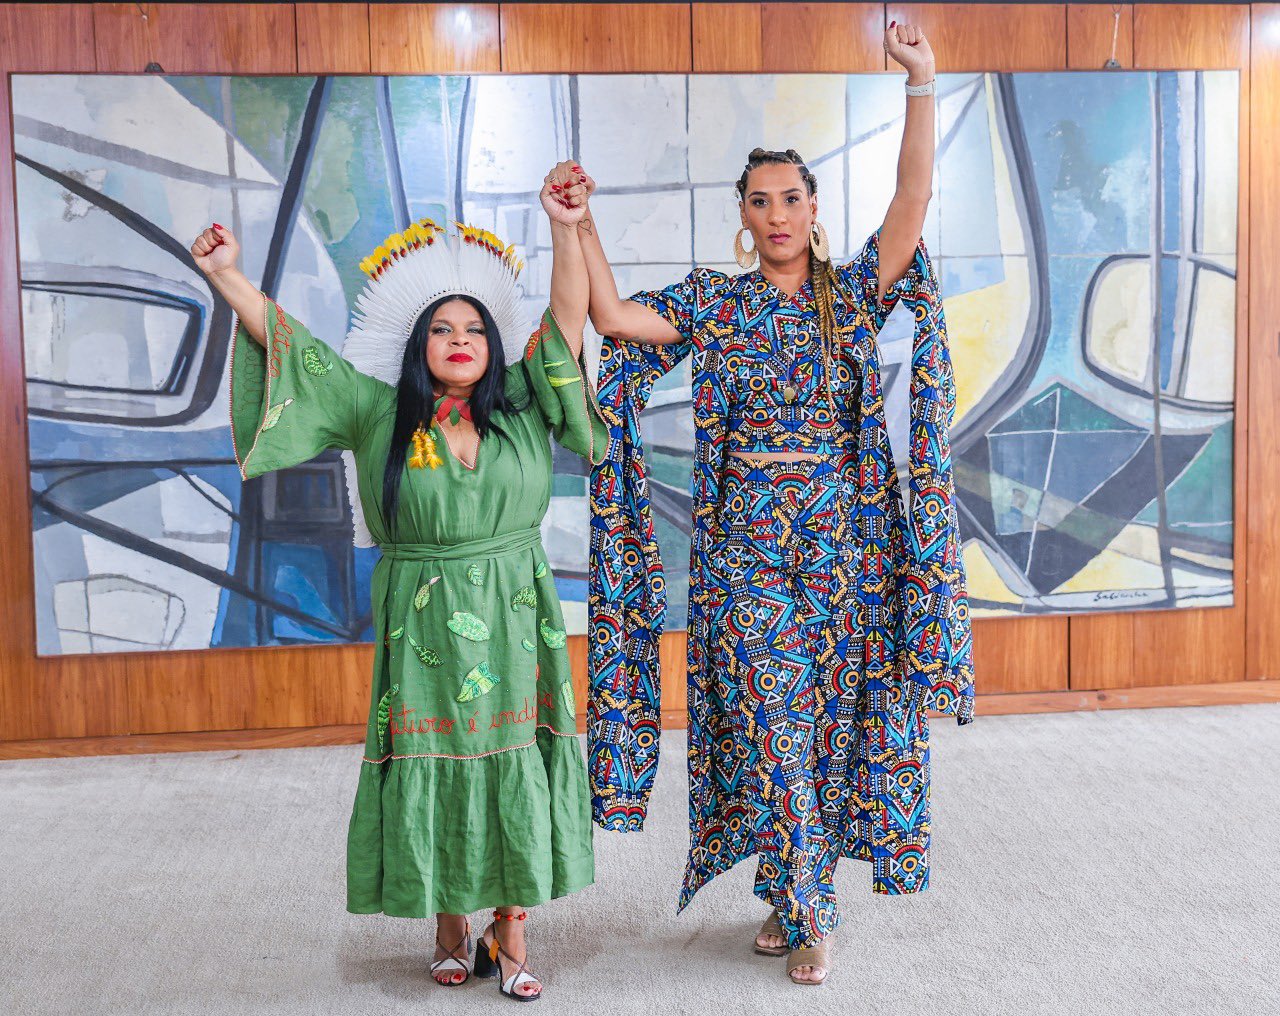 Sonia Guajajara, as Brazil’s first minister of Indigenous peoples, and Anielle Franco, minister for racial equality. Image courtesy of Ricardo Stuckert @ricardostuckert